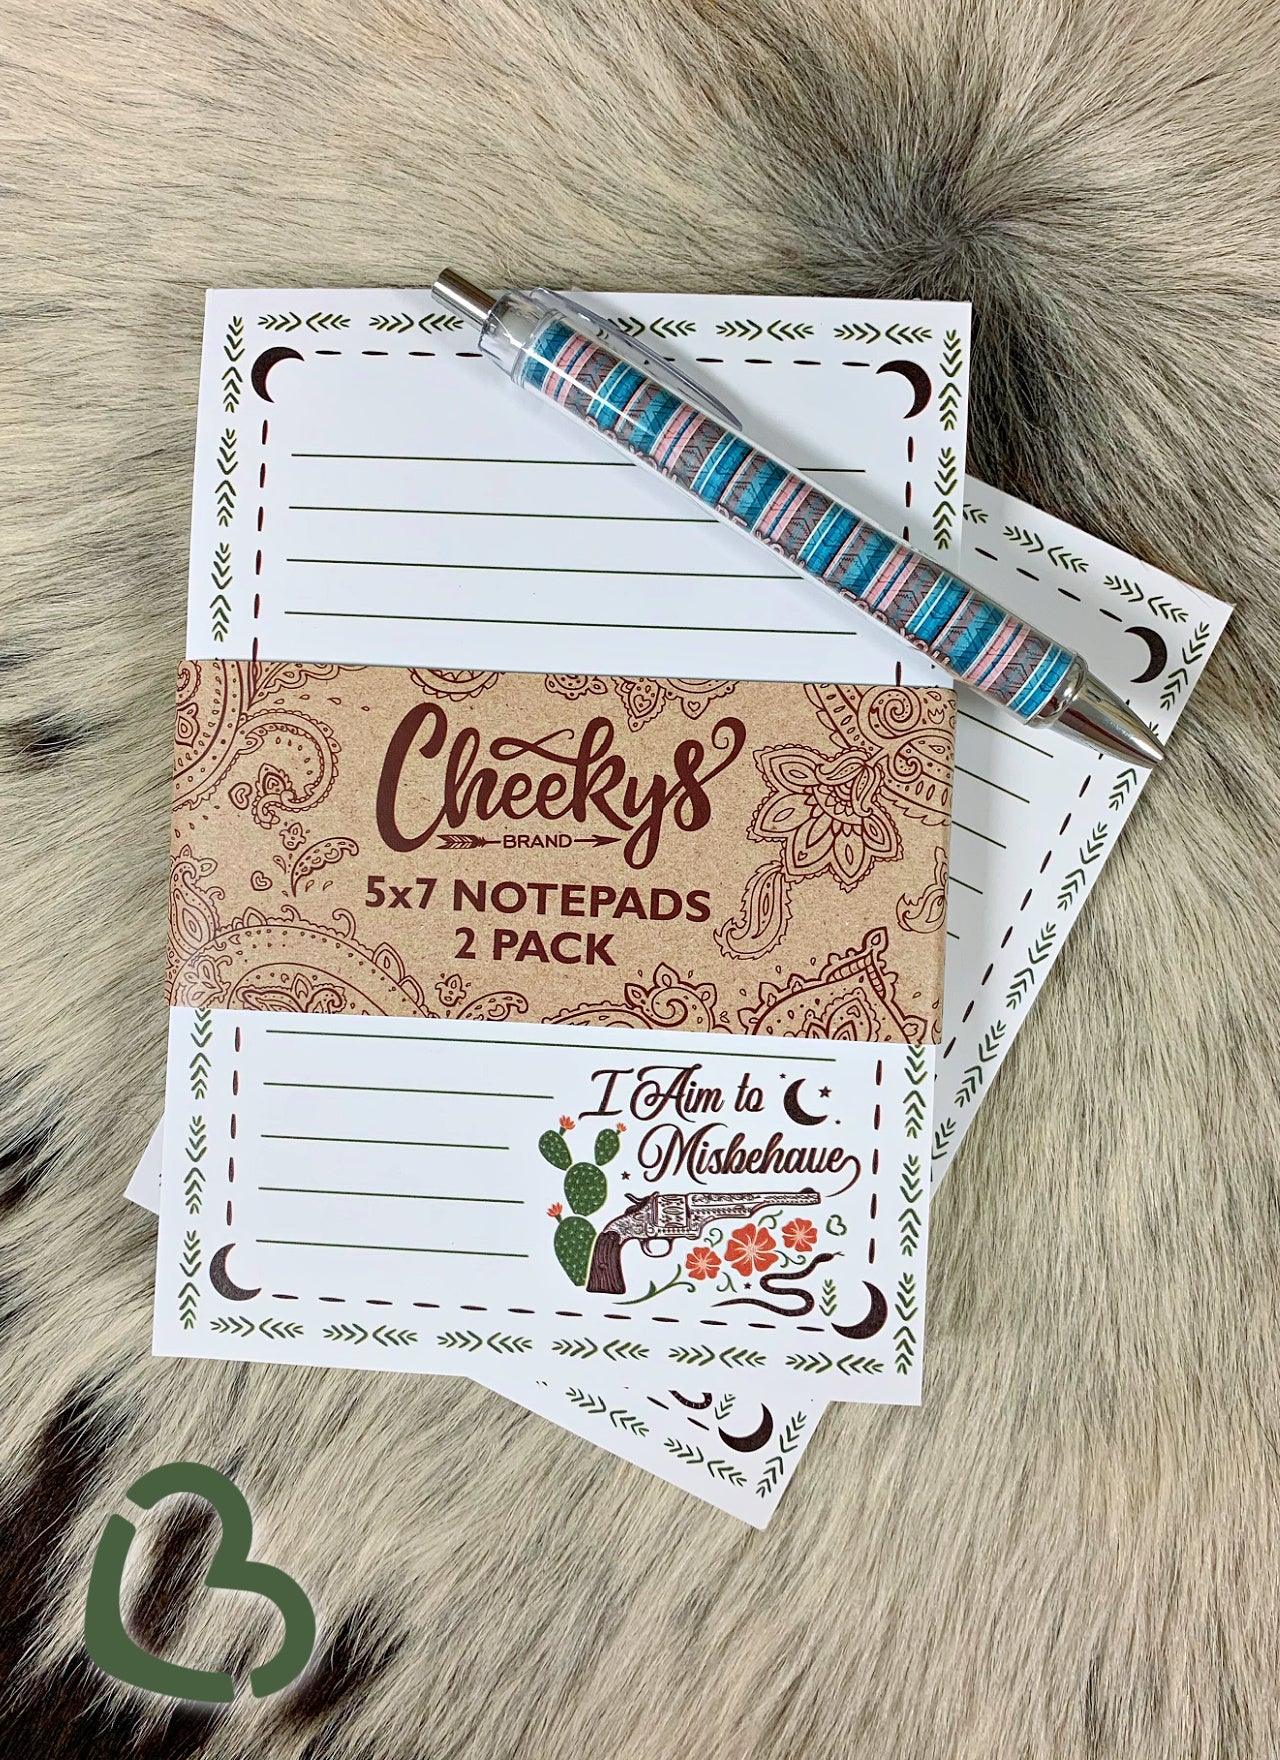 I Aim to Misbehave Note Pad Set of 2 Accessories 0 